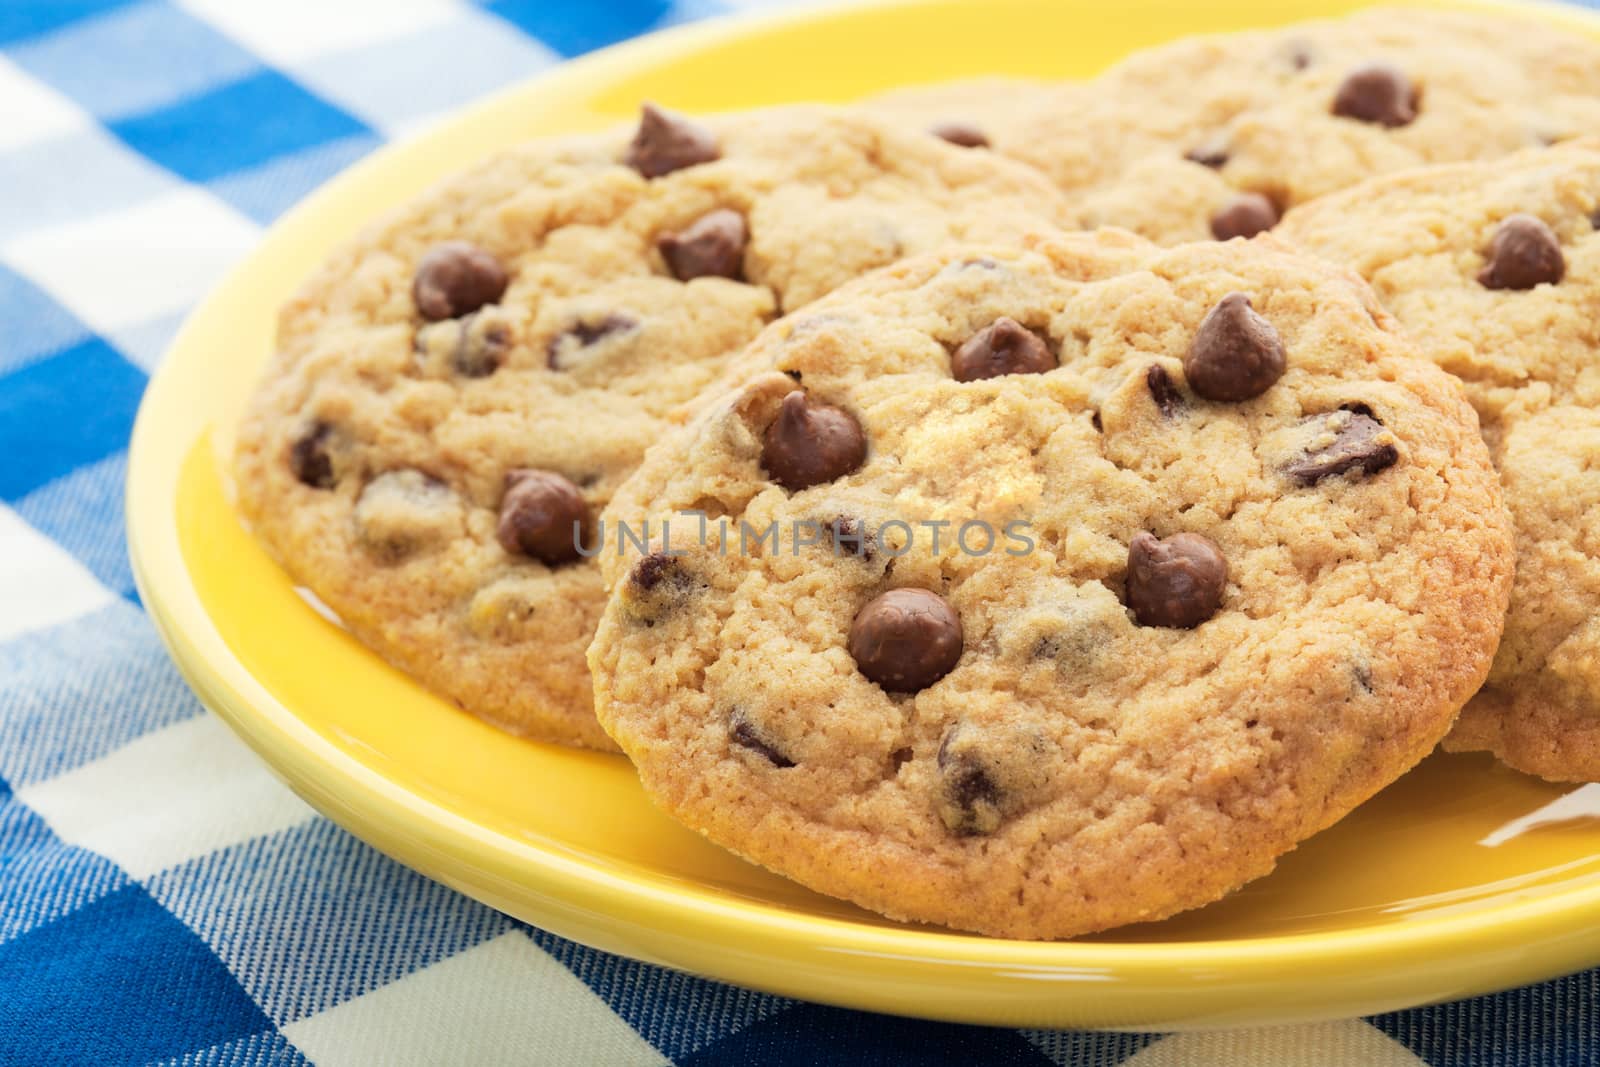 Homemade, chocolate chip cookies, like Mom used to make, served on a yellow plate.  Shallow depth of field.